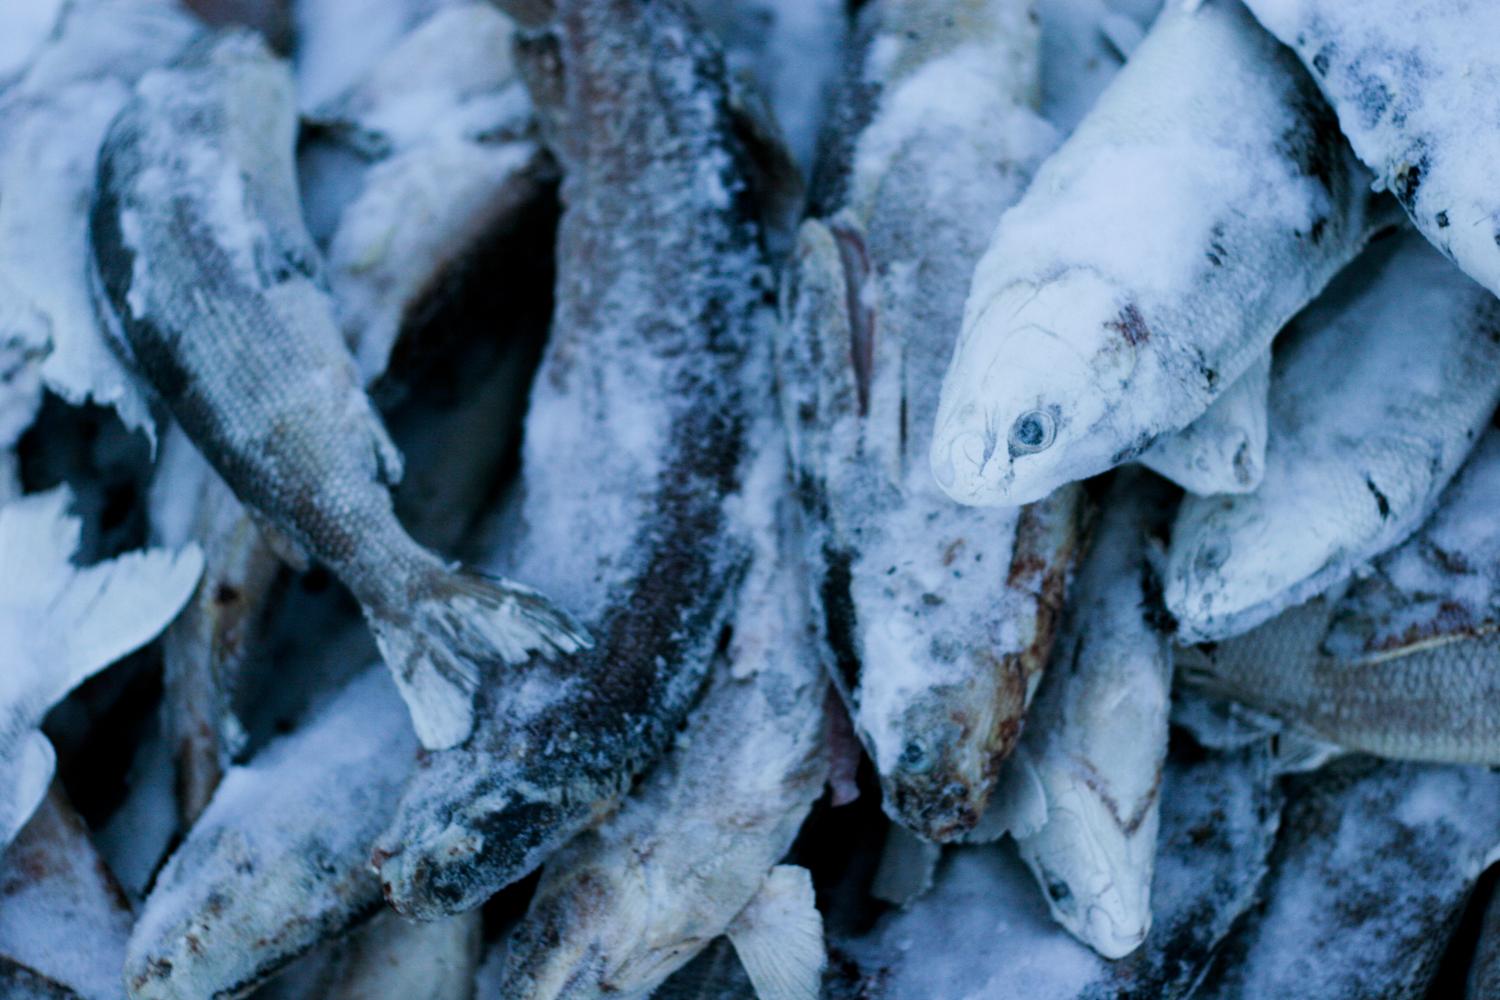   This frozen fish, netted in Ambler River during the summer months, will be added to dogfood in the cookpot for the Osborne sled dogs.  